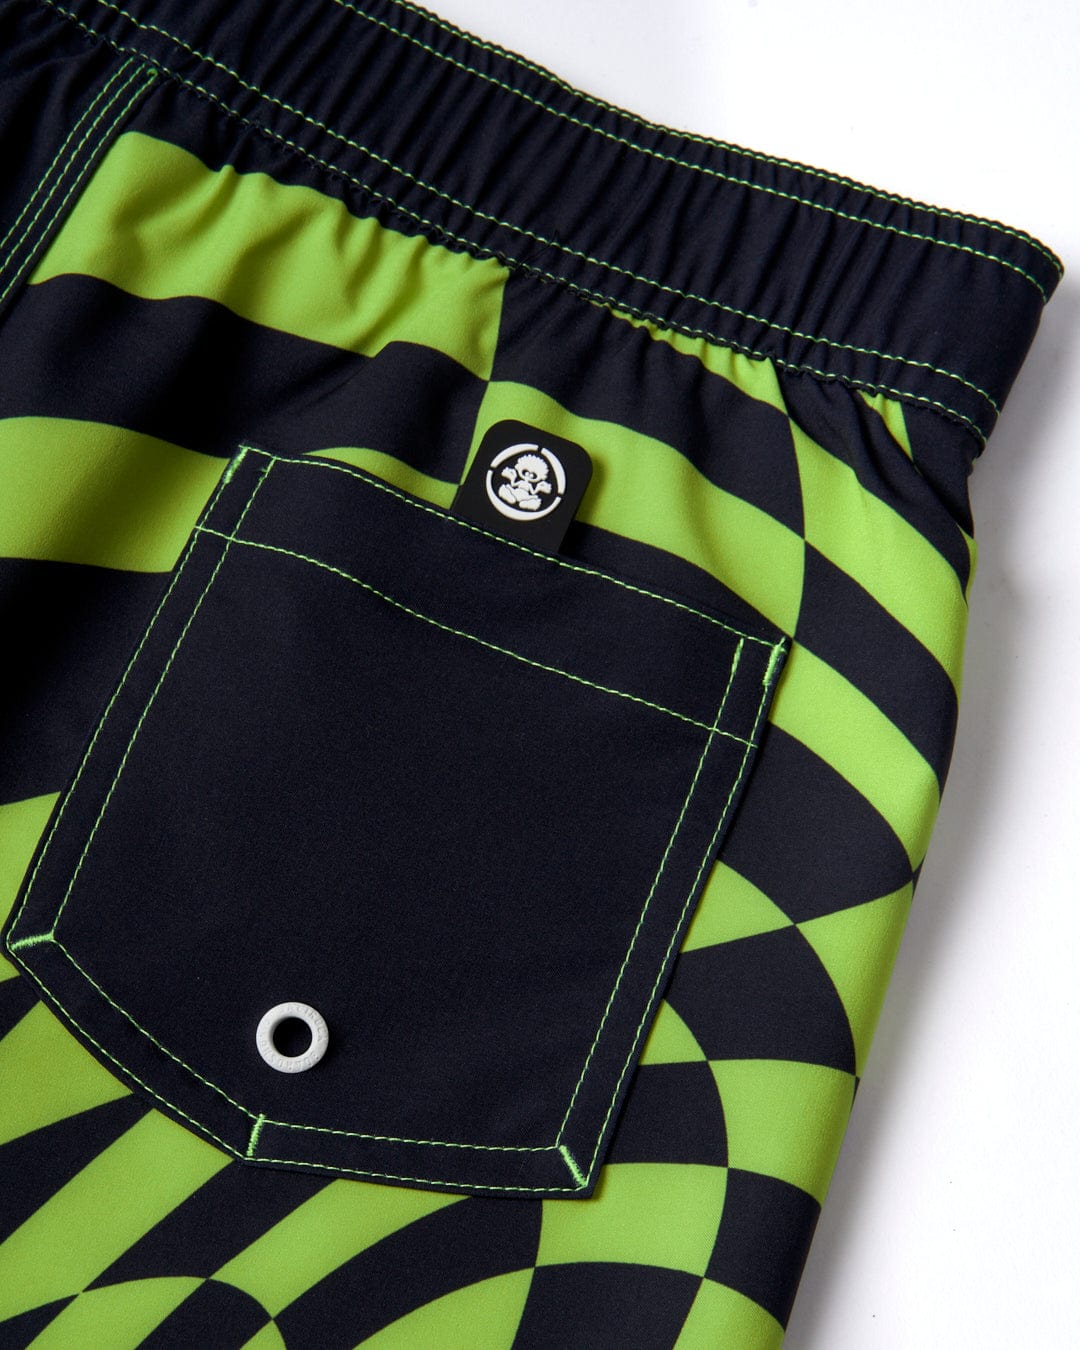 A green and black Saltrock board short with an elasticated waistband and a pocket. Made from Repreve Recycled material for sustainability.